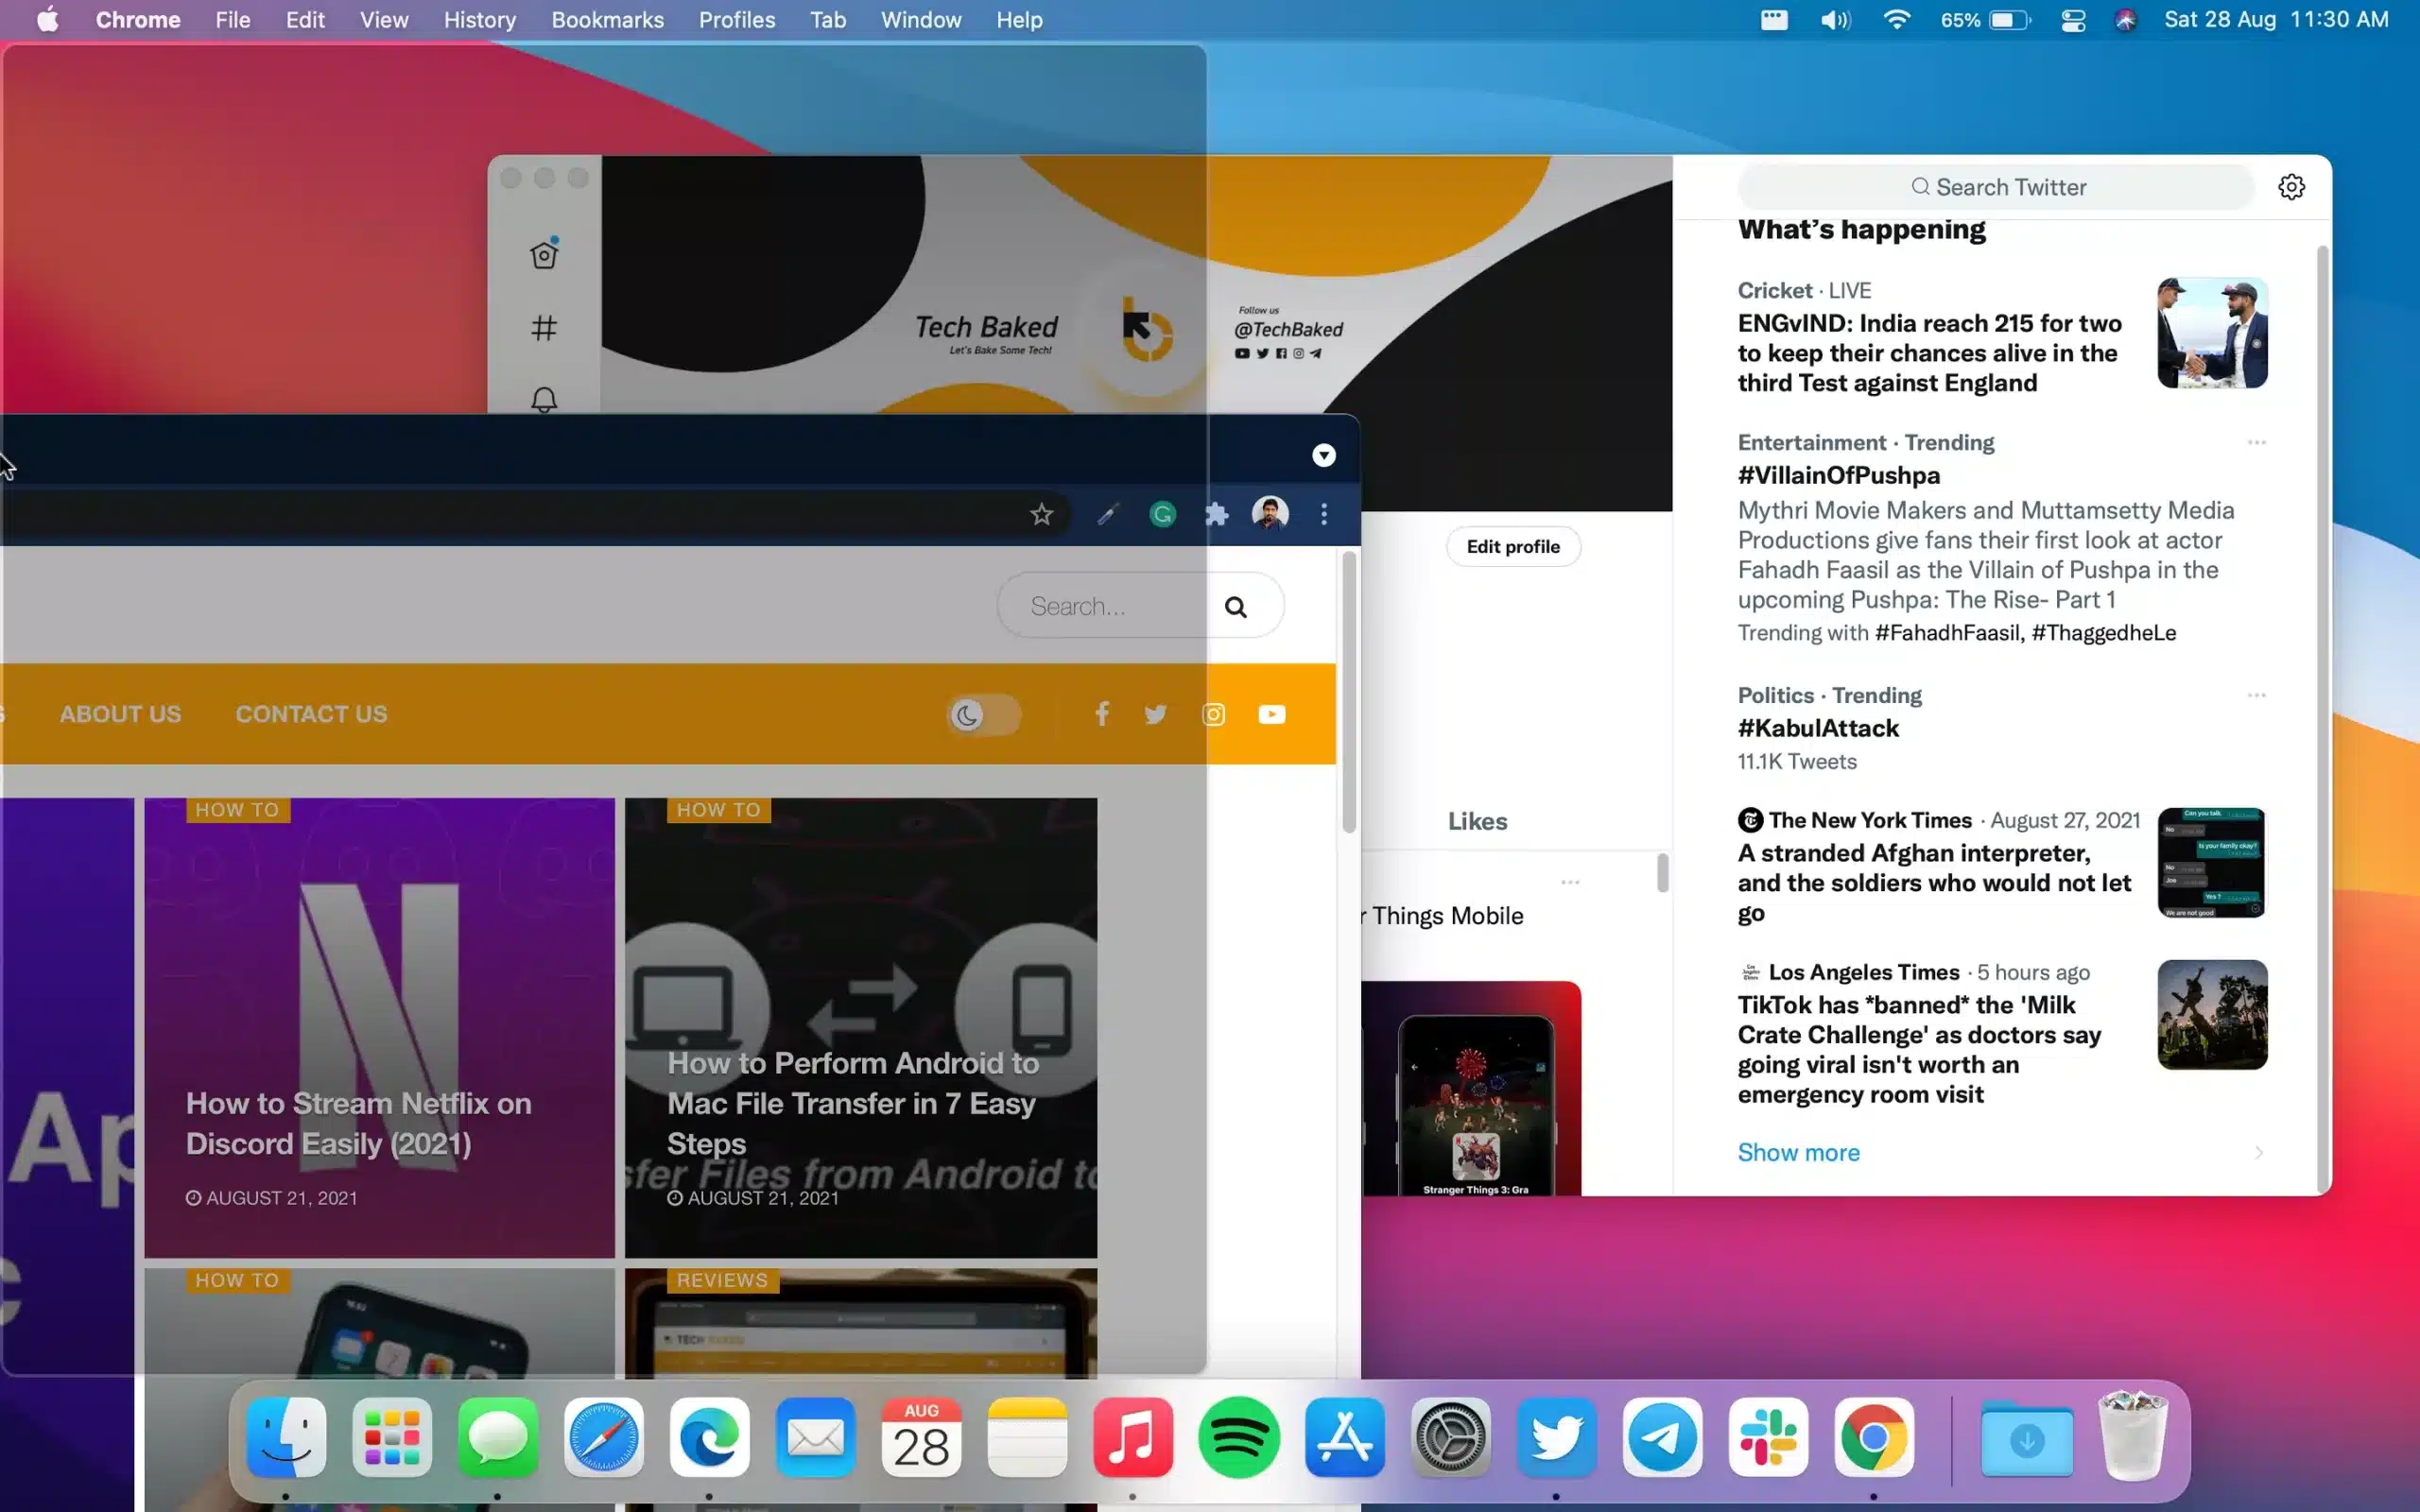 Enter Split Screen on macOS using Rectangle app. Drag the window to a side until you see Translucent window